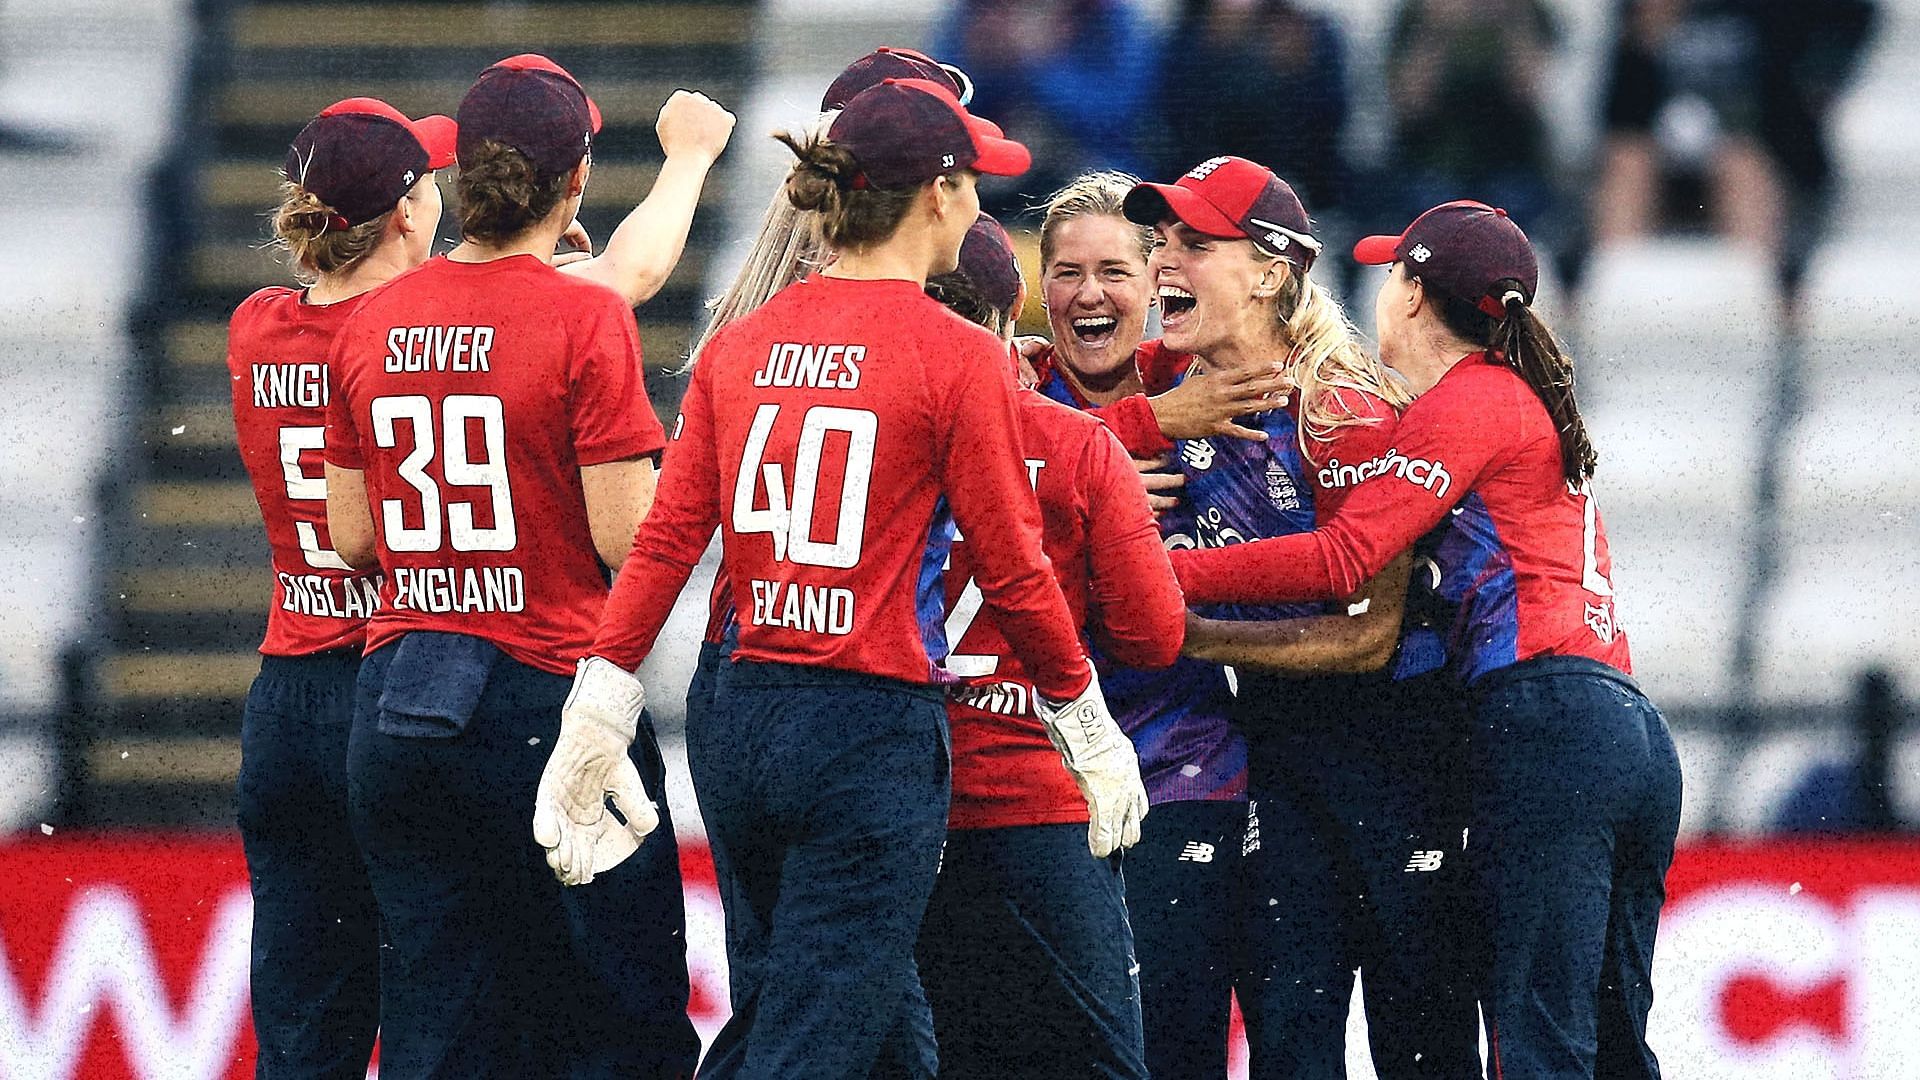 <div class="paragraphs"><p>England women won the first T20I against India by 18 runs by DLS method</p></div>